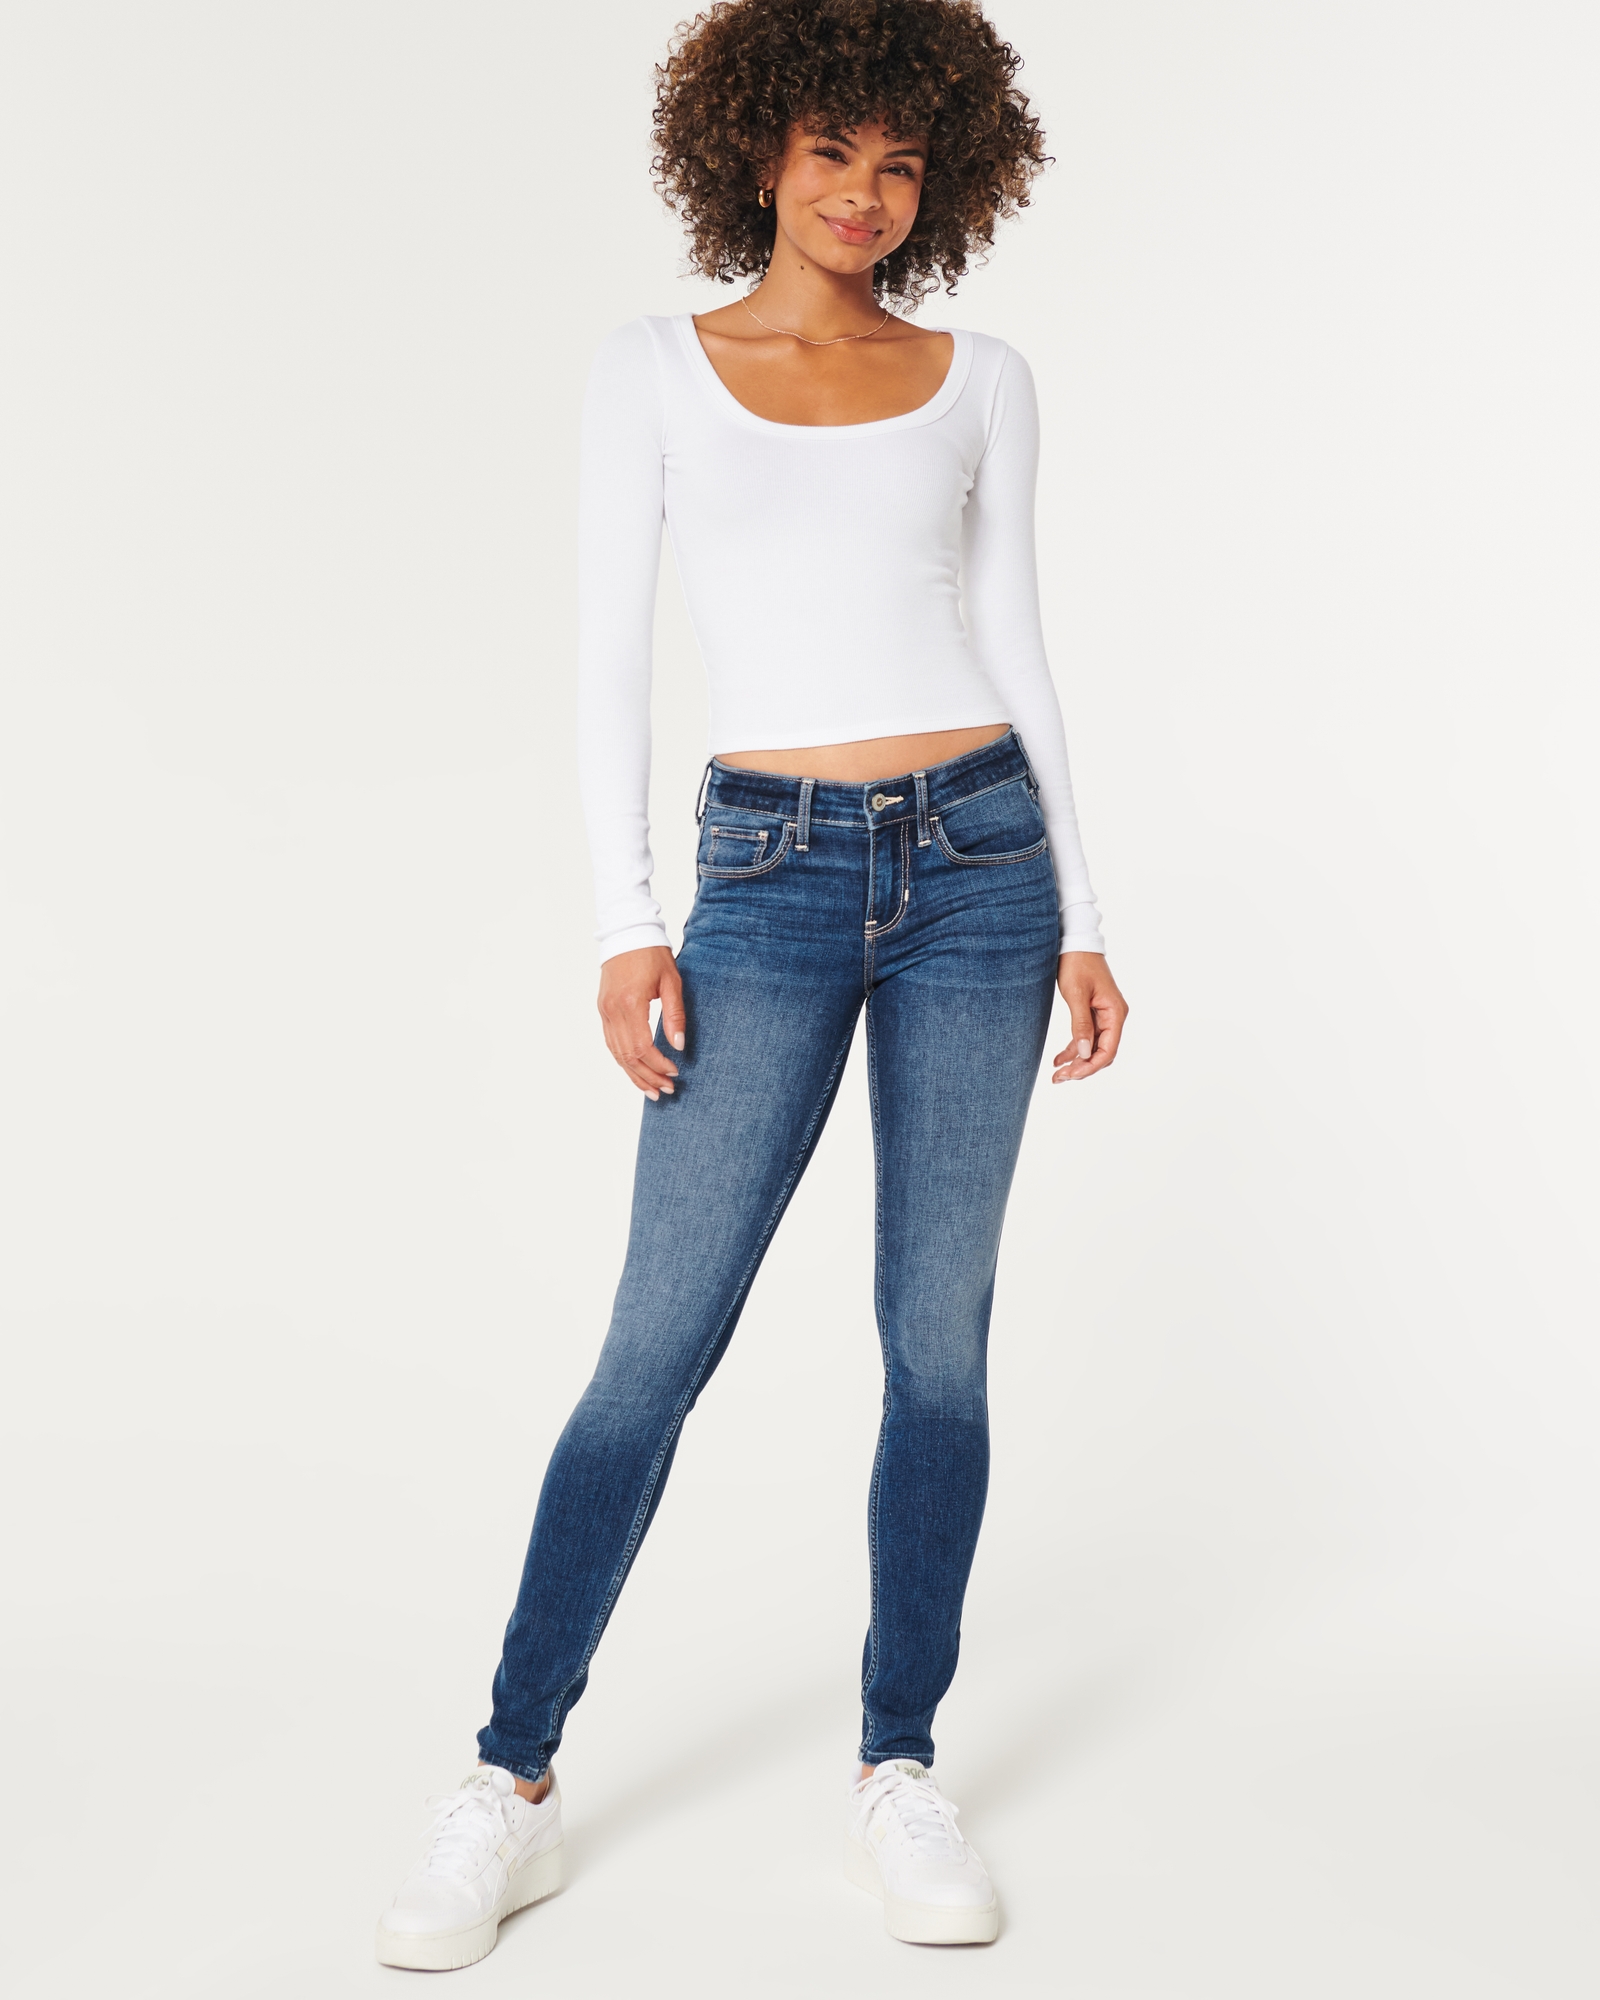 Hollister Dark Wash Low Rise Jean Jegging Size 26 - $25 (58% Off Retail) -  From Shannon